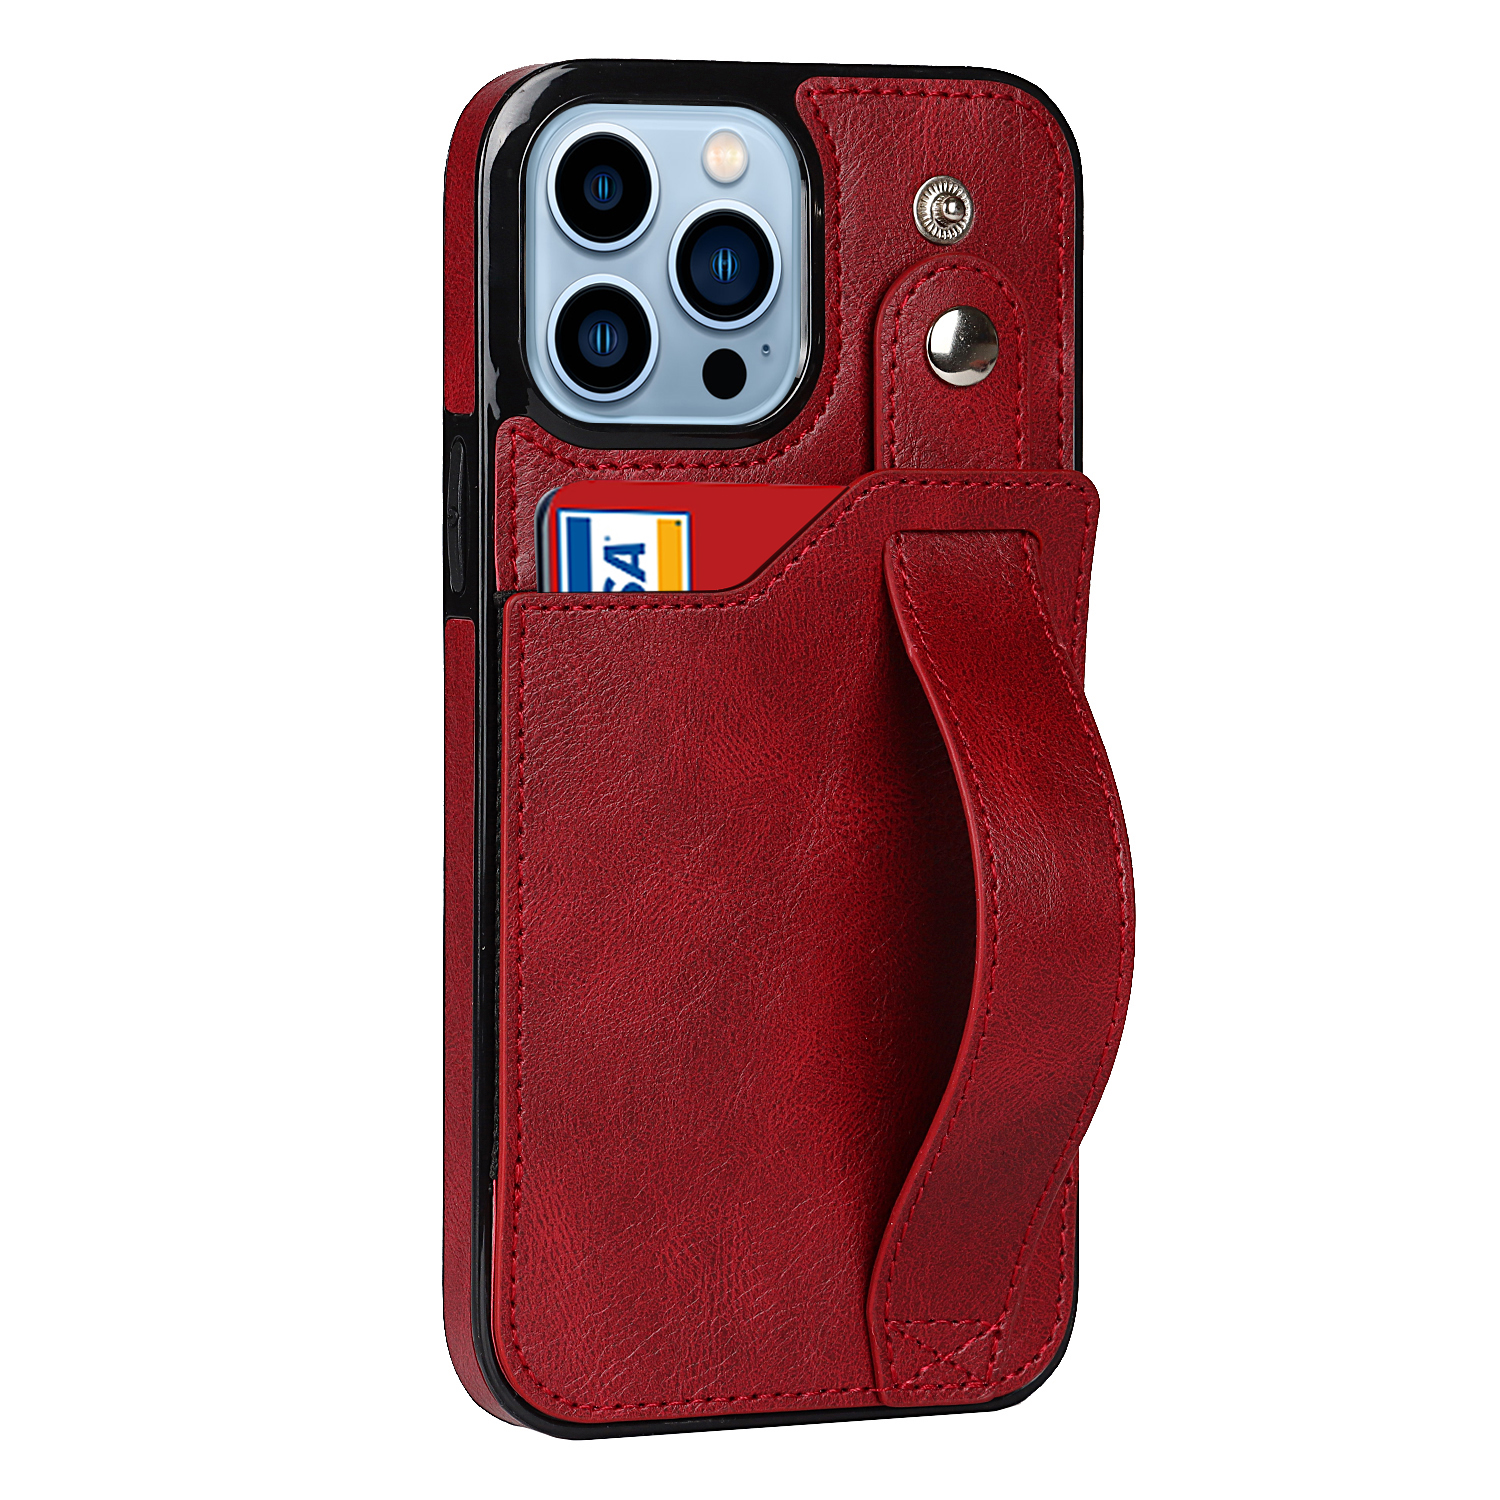 Samsung Galaxy A52s Back Cover Hoesje met Handvat - Kunstleer - Handvat - Backcover - Samsung Galaxy A52s - Rood